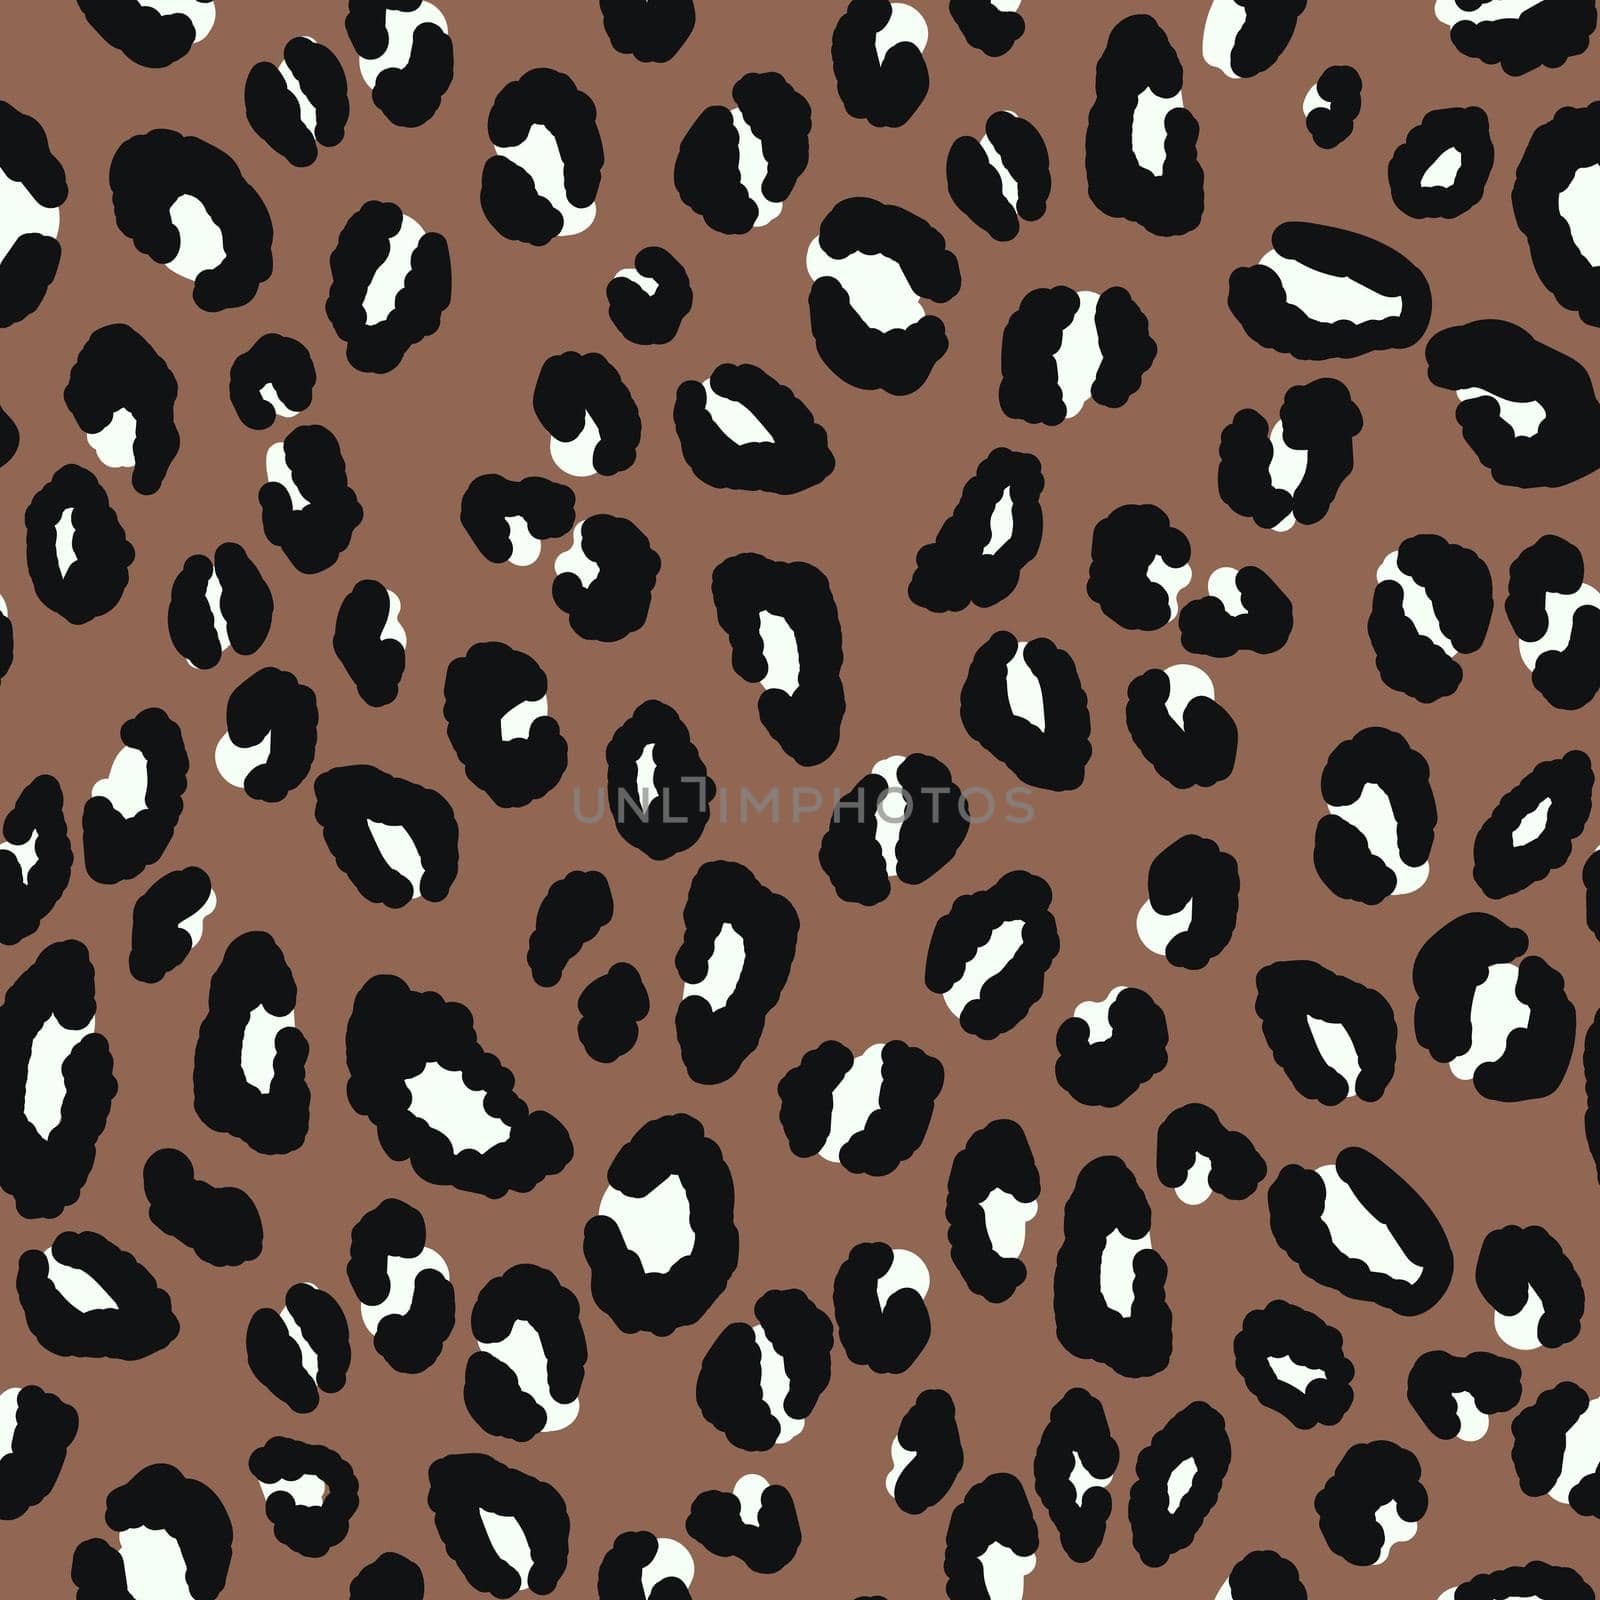 Abstract modern leopard seamless pattern. Animals trendy background. Brown and black decorative vector stock illustration for print, card, postcard, fabric, textile. Modern ornament of stylized skin. by allaku